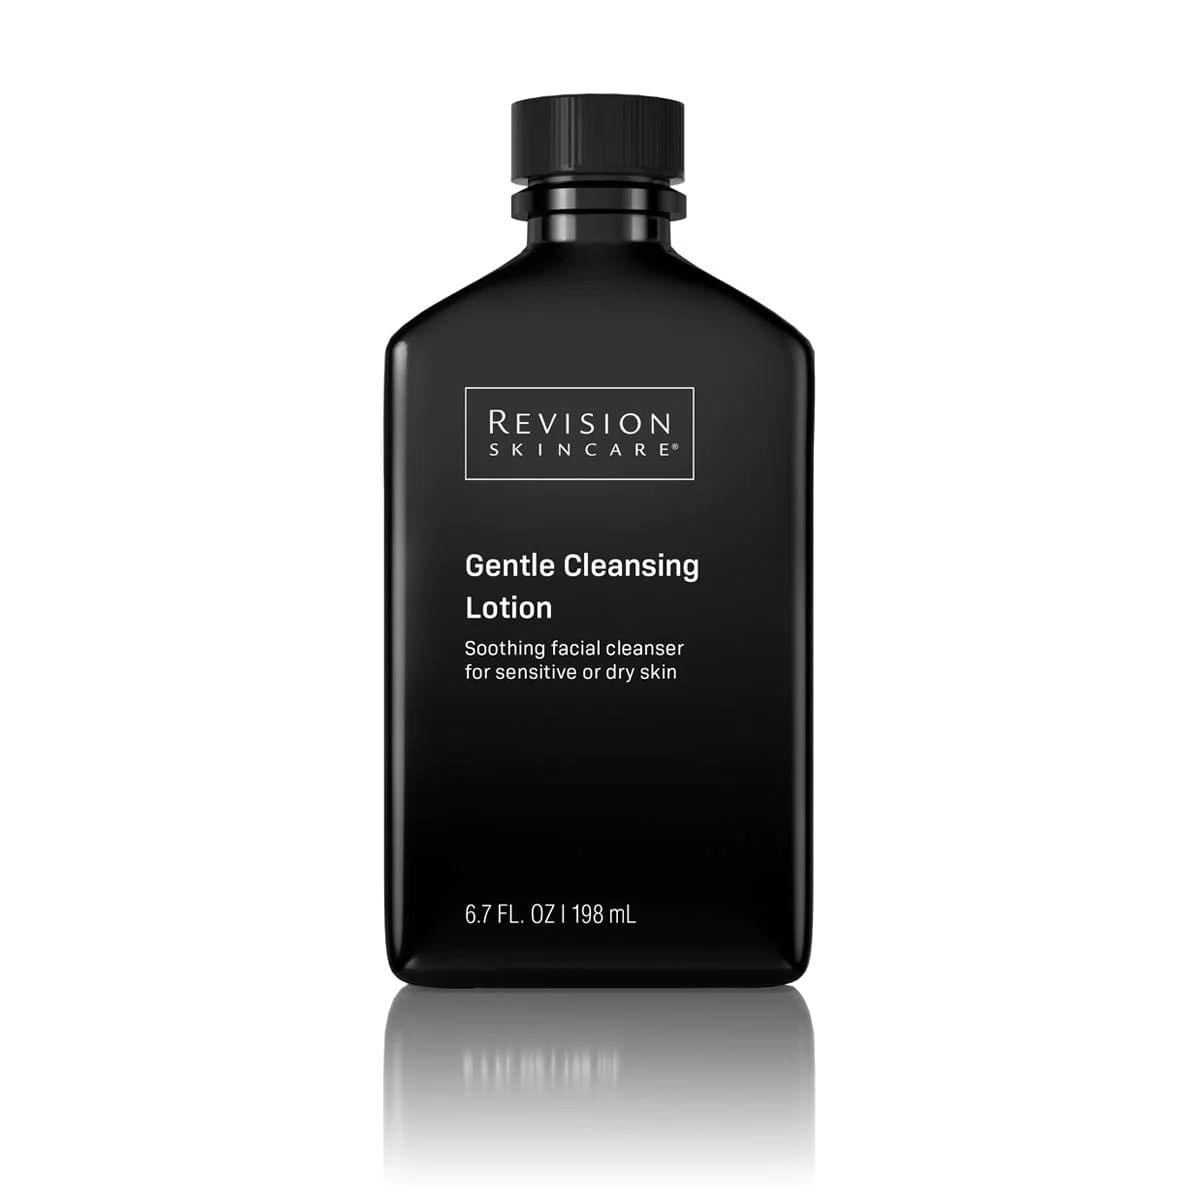 Gentle Cleansing Lotion 6.7 fl oz | Revision skincare